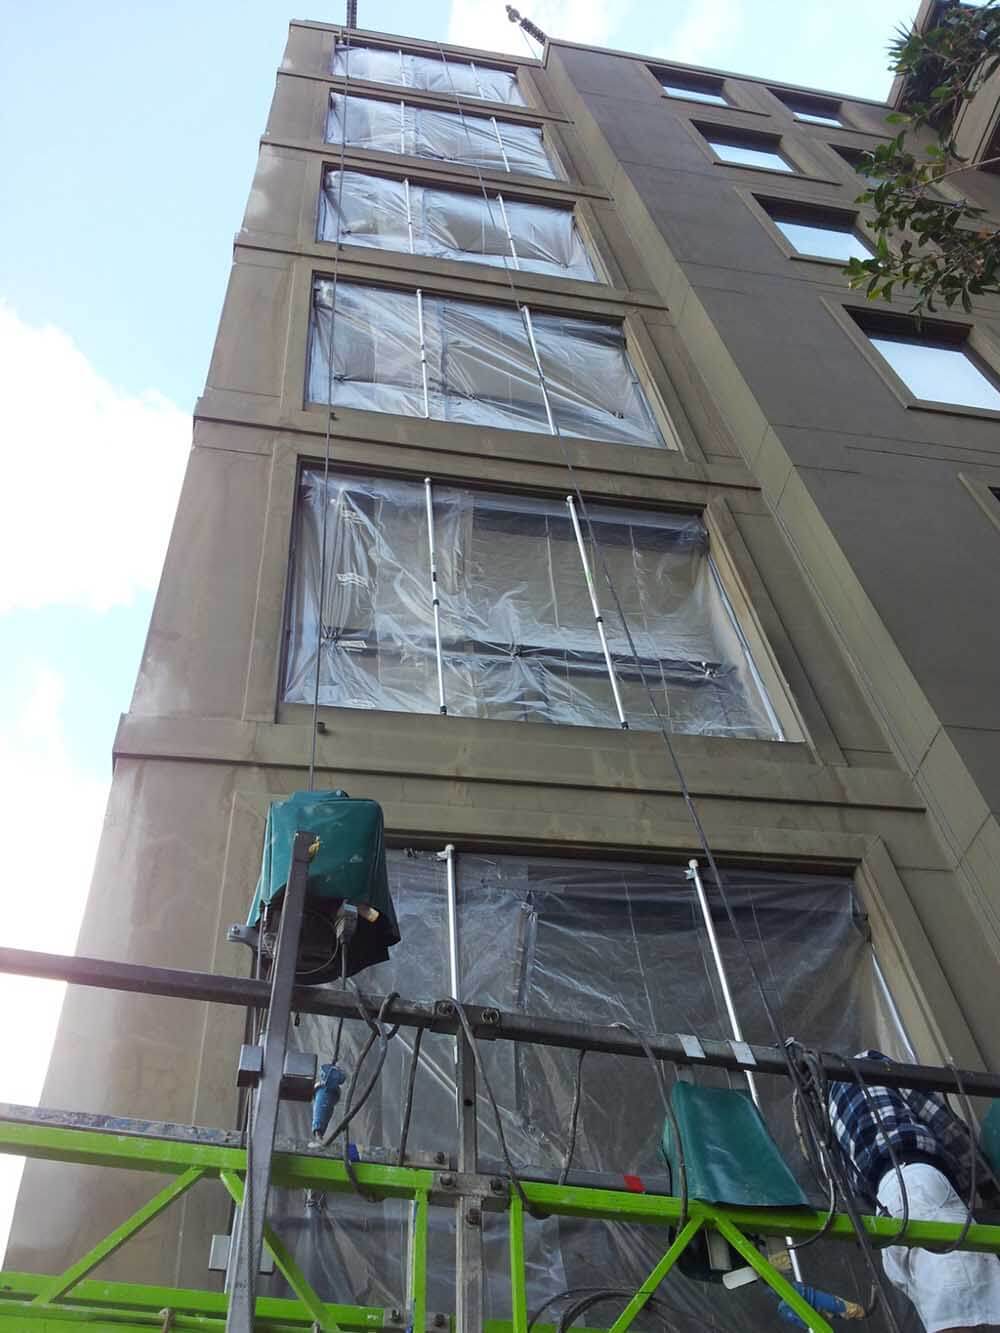 Remedial work on a high rise apartment building